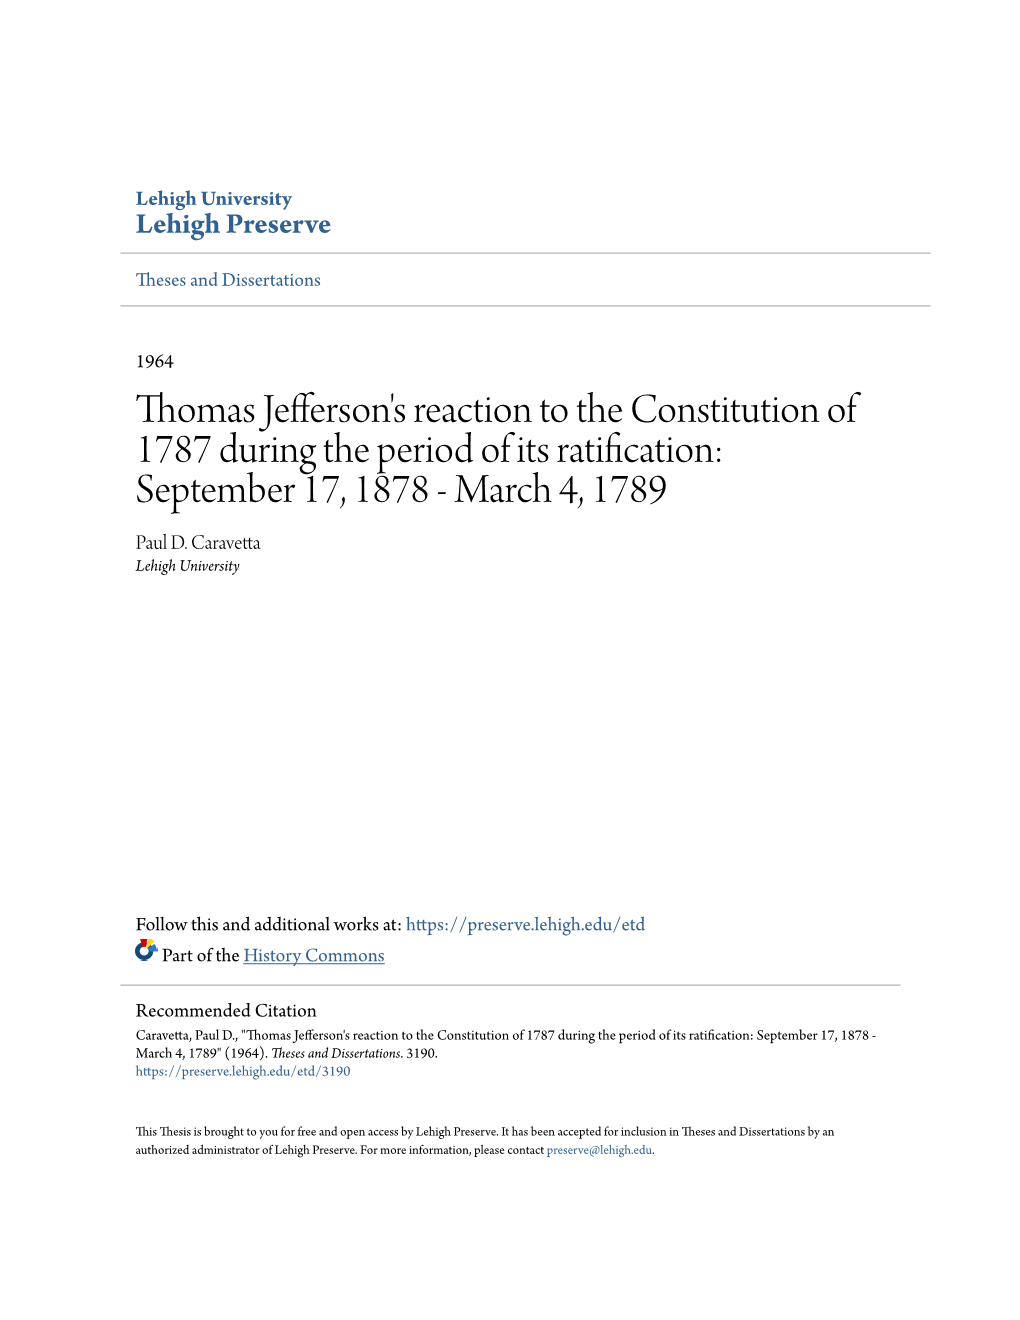 Thomas Jefferson's Reaction to the Constitution of 1787 During the Period of Its Ratification: September 17, 1878 - March 4, 1789 Paul D